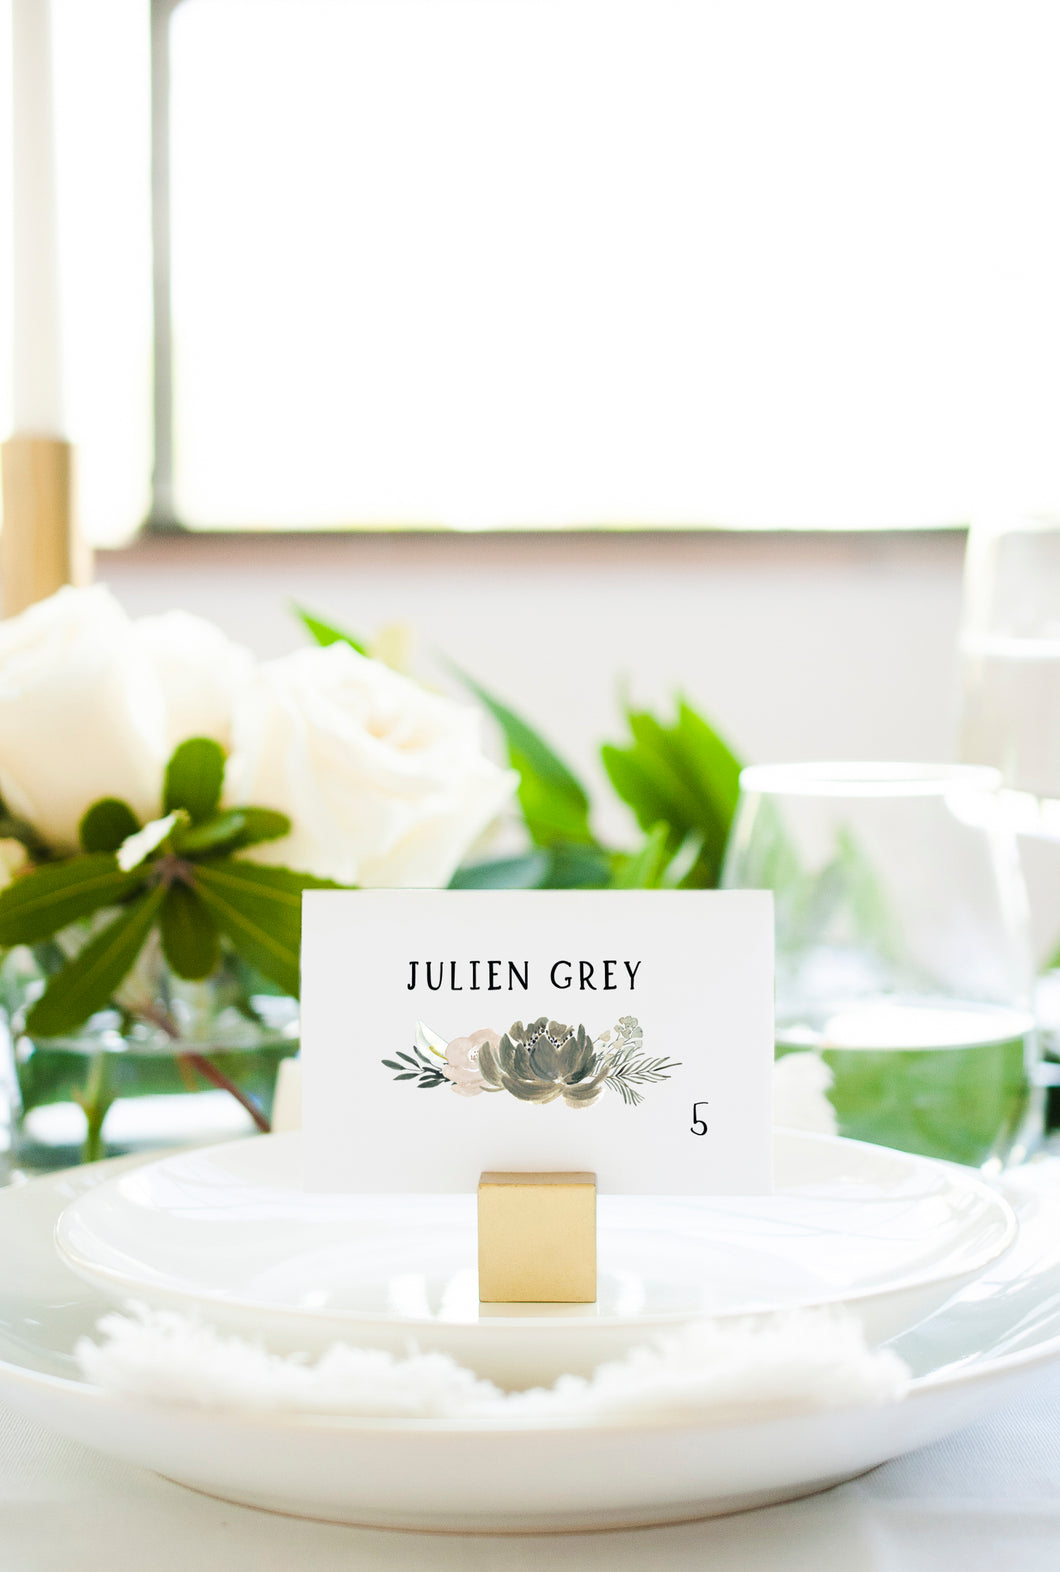 Classic Sage and Blush Wedding Place Cards